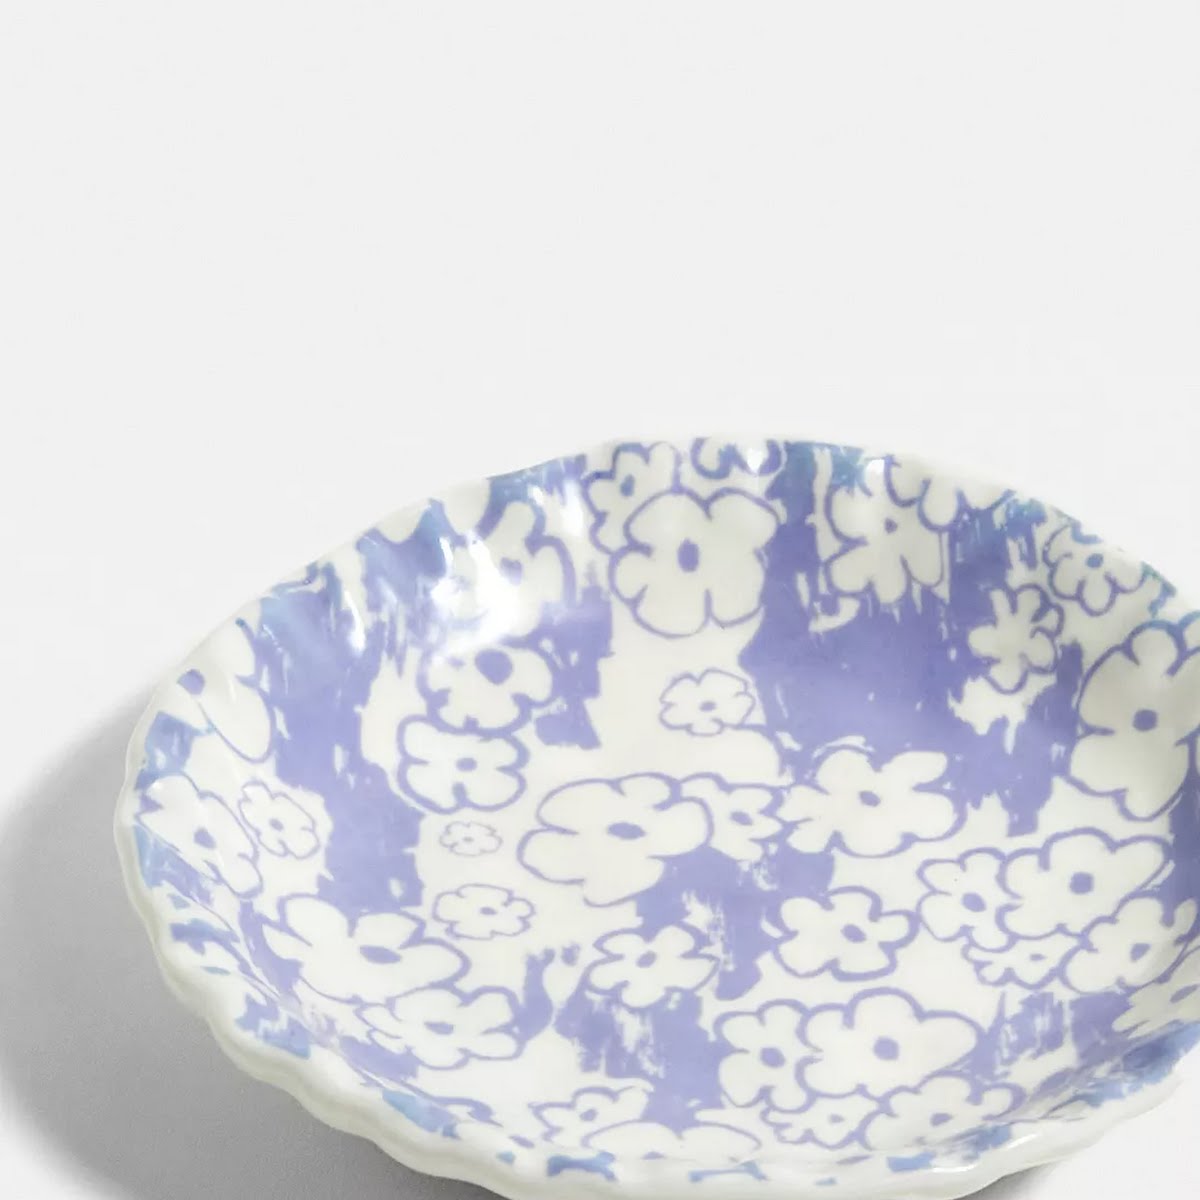 Urban Outfitters, Juniper Lilac Floral Dinner Plate, €9